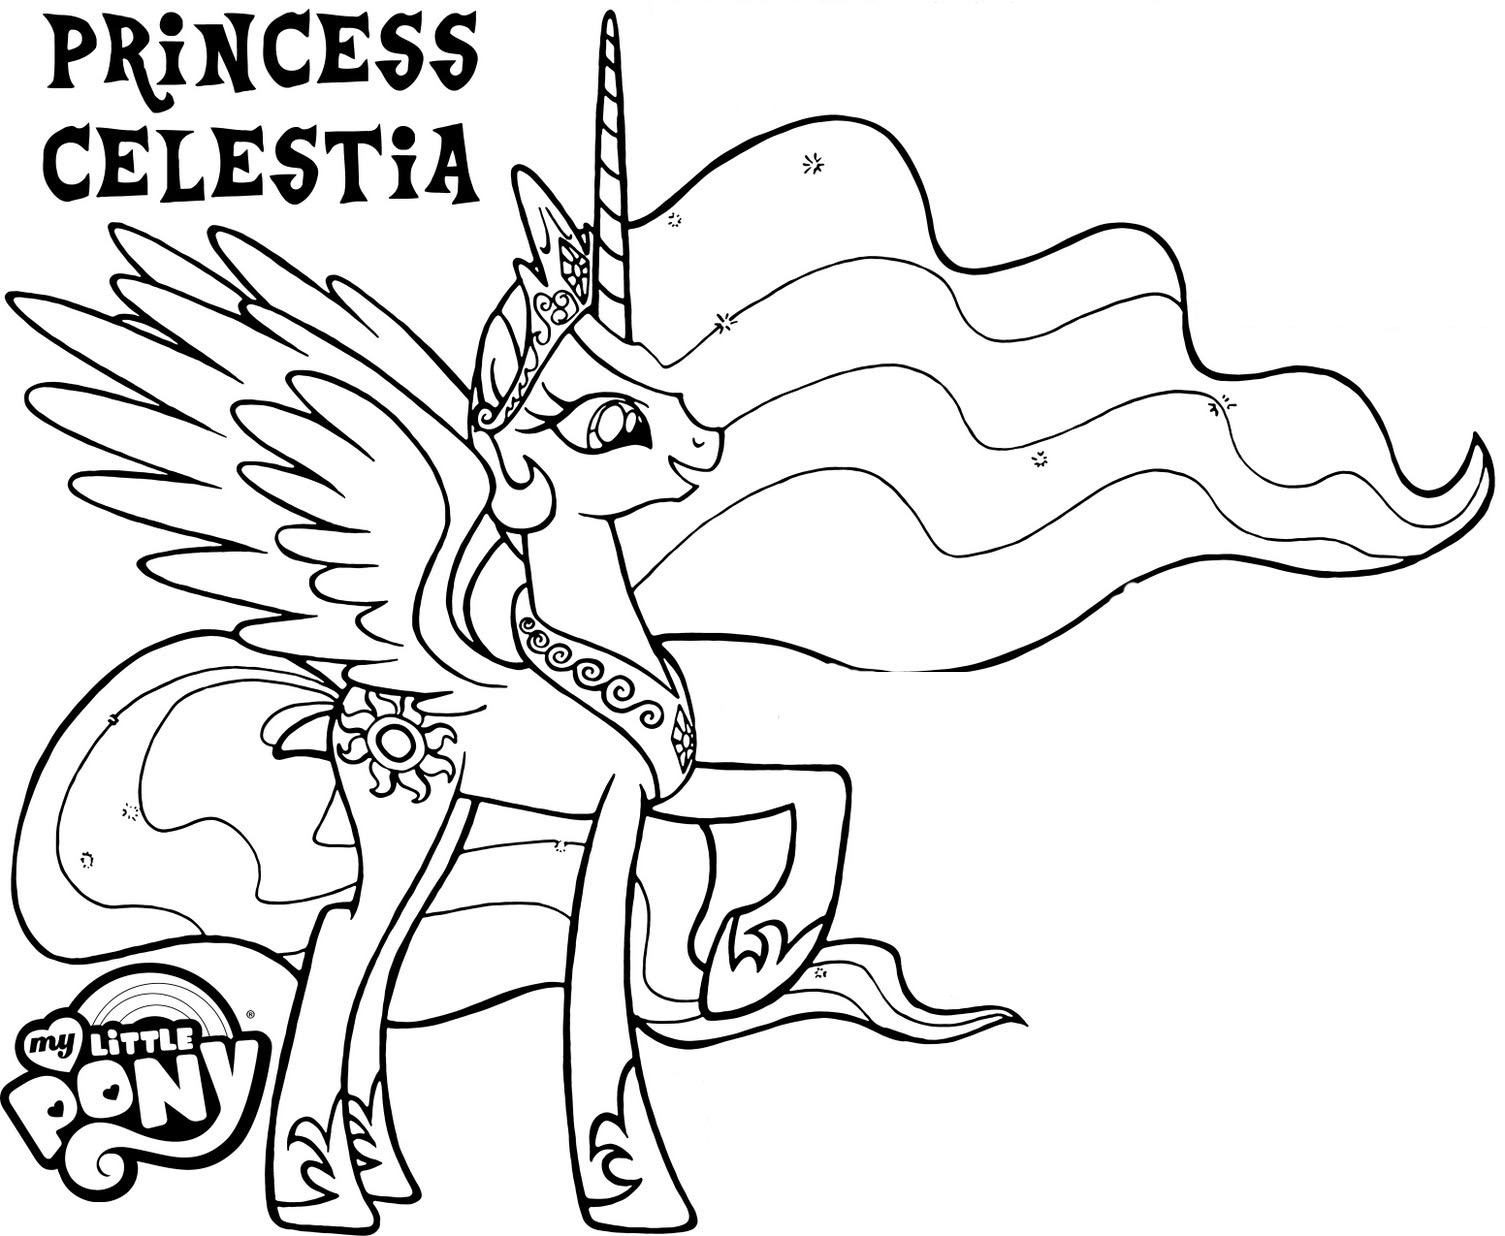 Princess Celestia Coloring Pages - Best Coloring Pages For ...